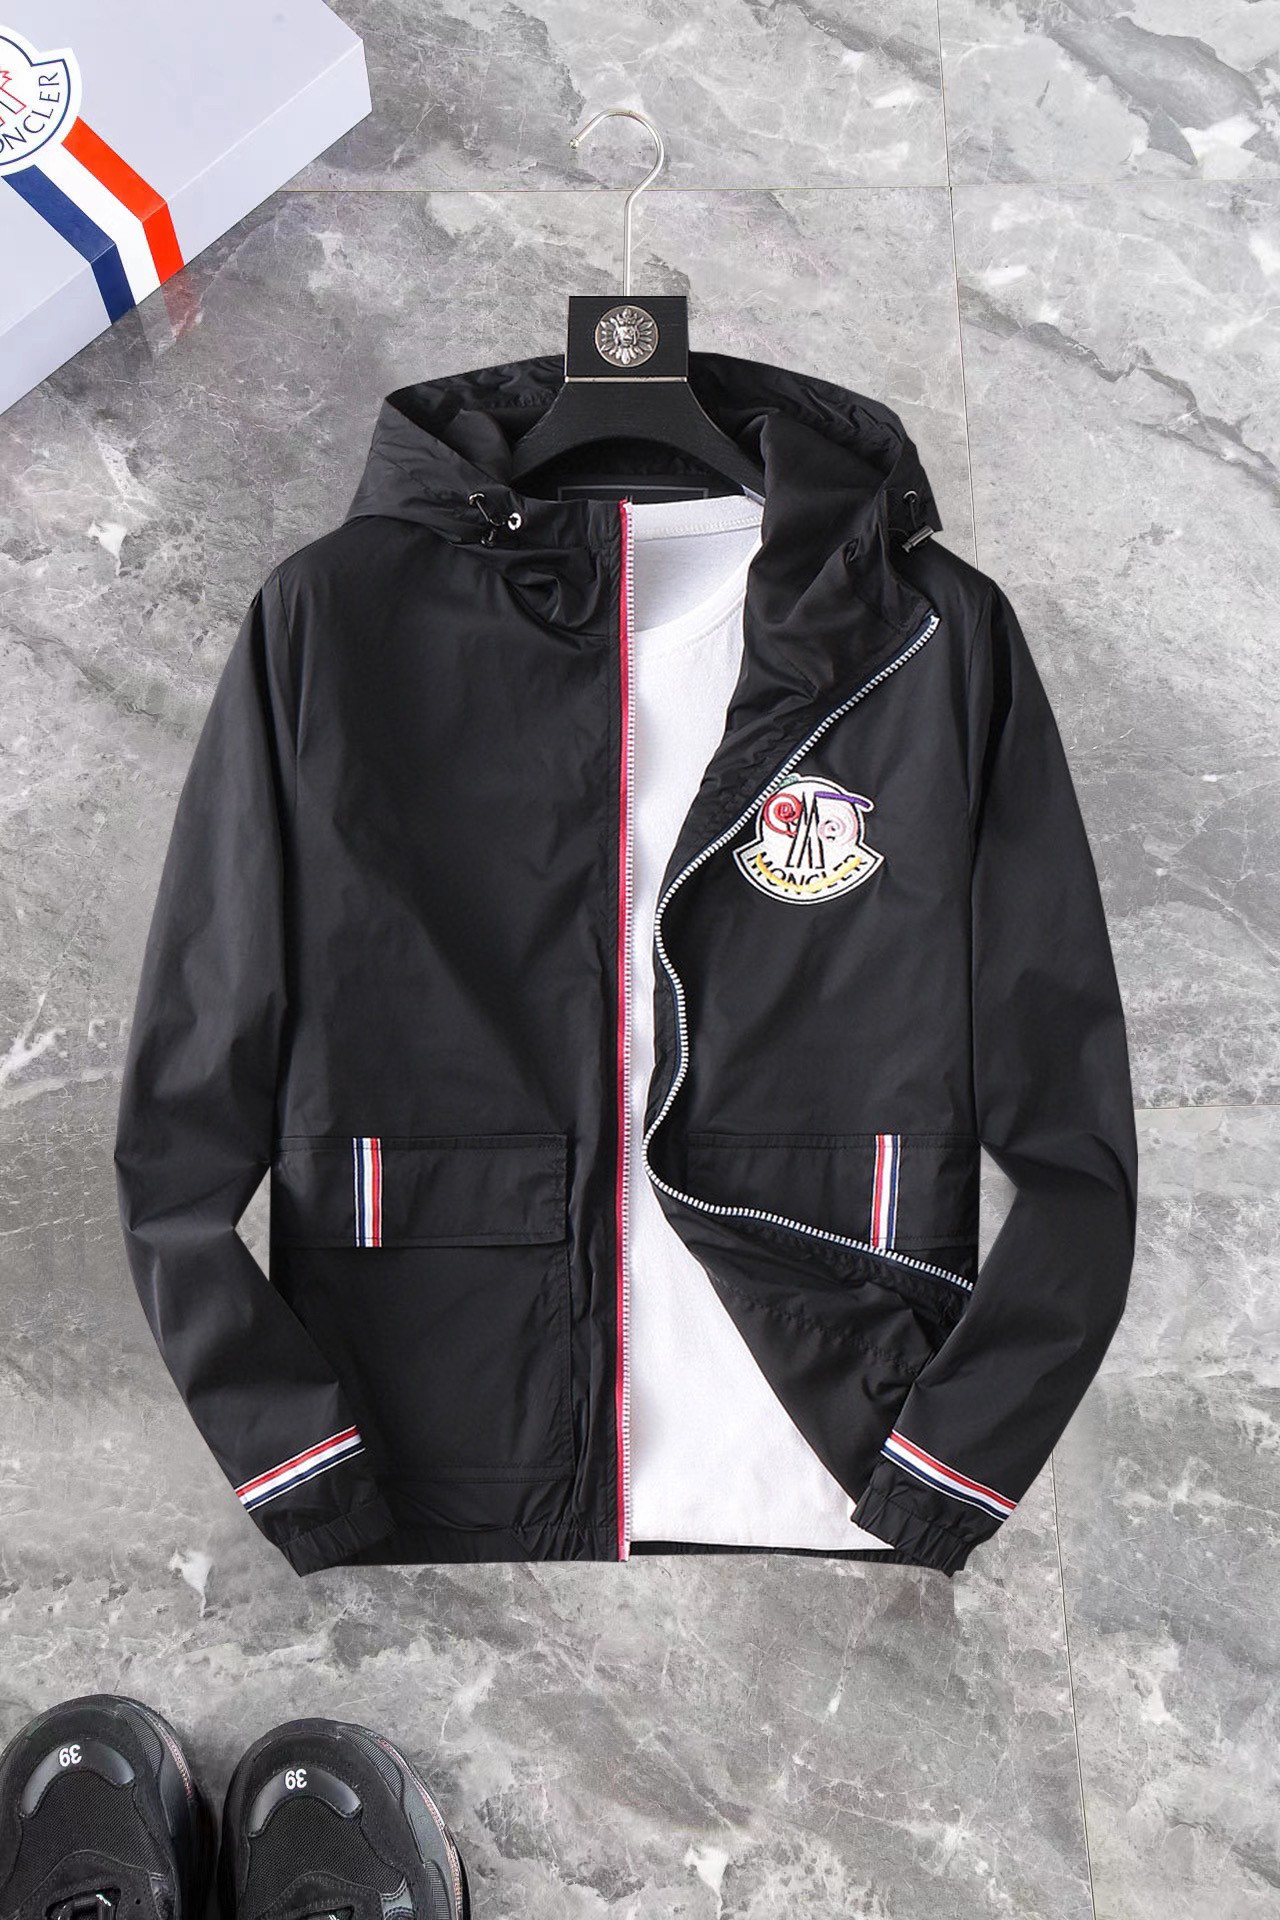 Shop Now
 Moncler Clothing Coats & Jackets Online From China Fashion